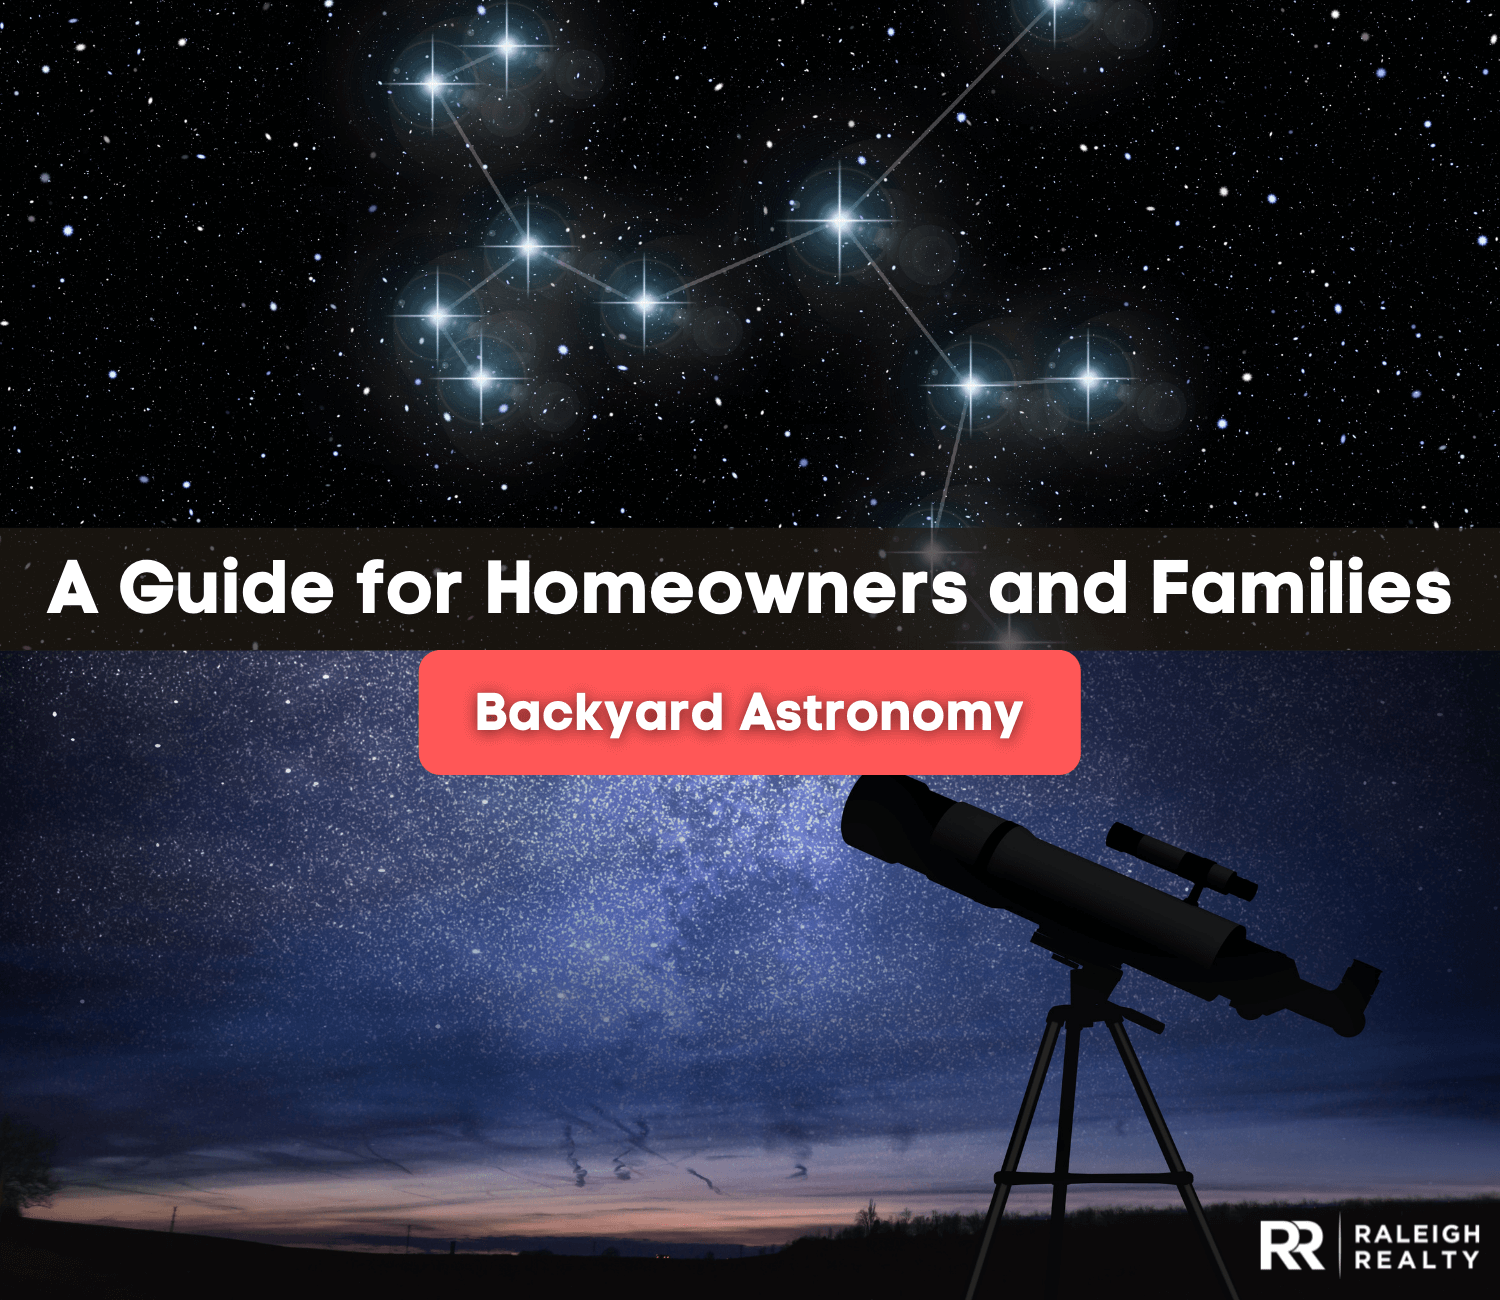 Backyard Astronomy: A Guide for homeowners and families to understanding space, stars and planets!